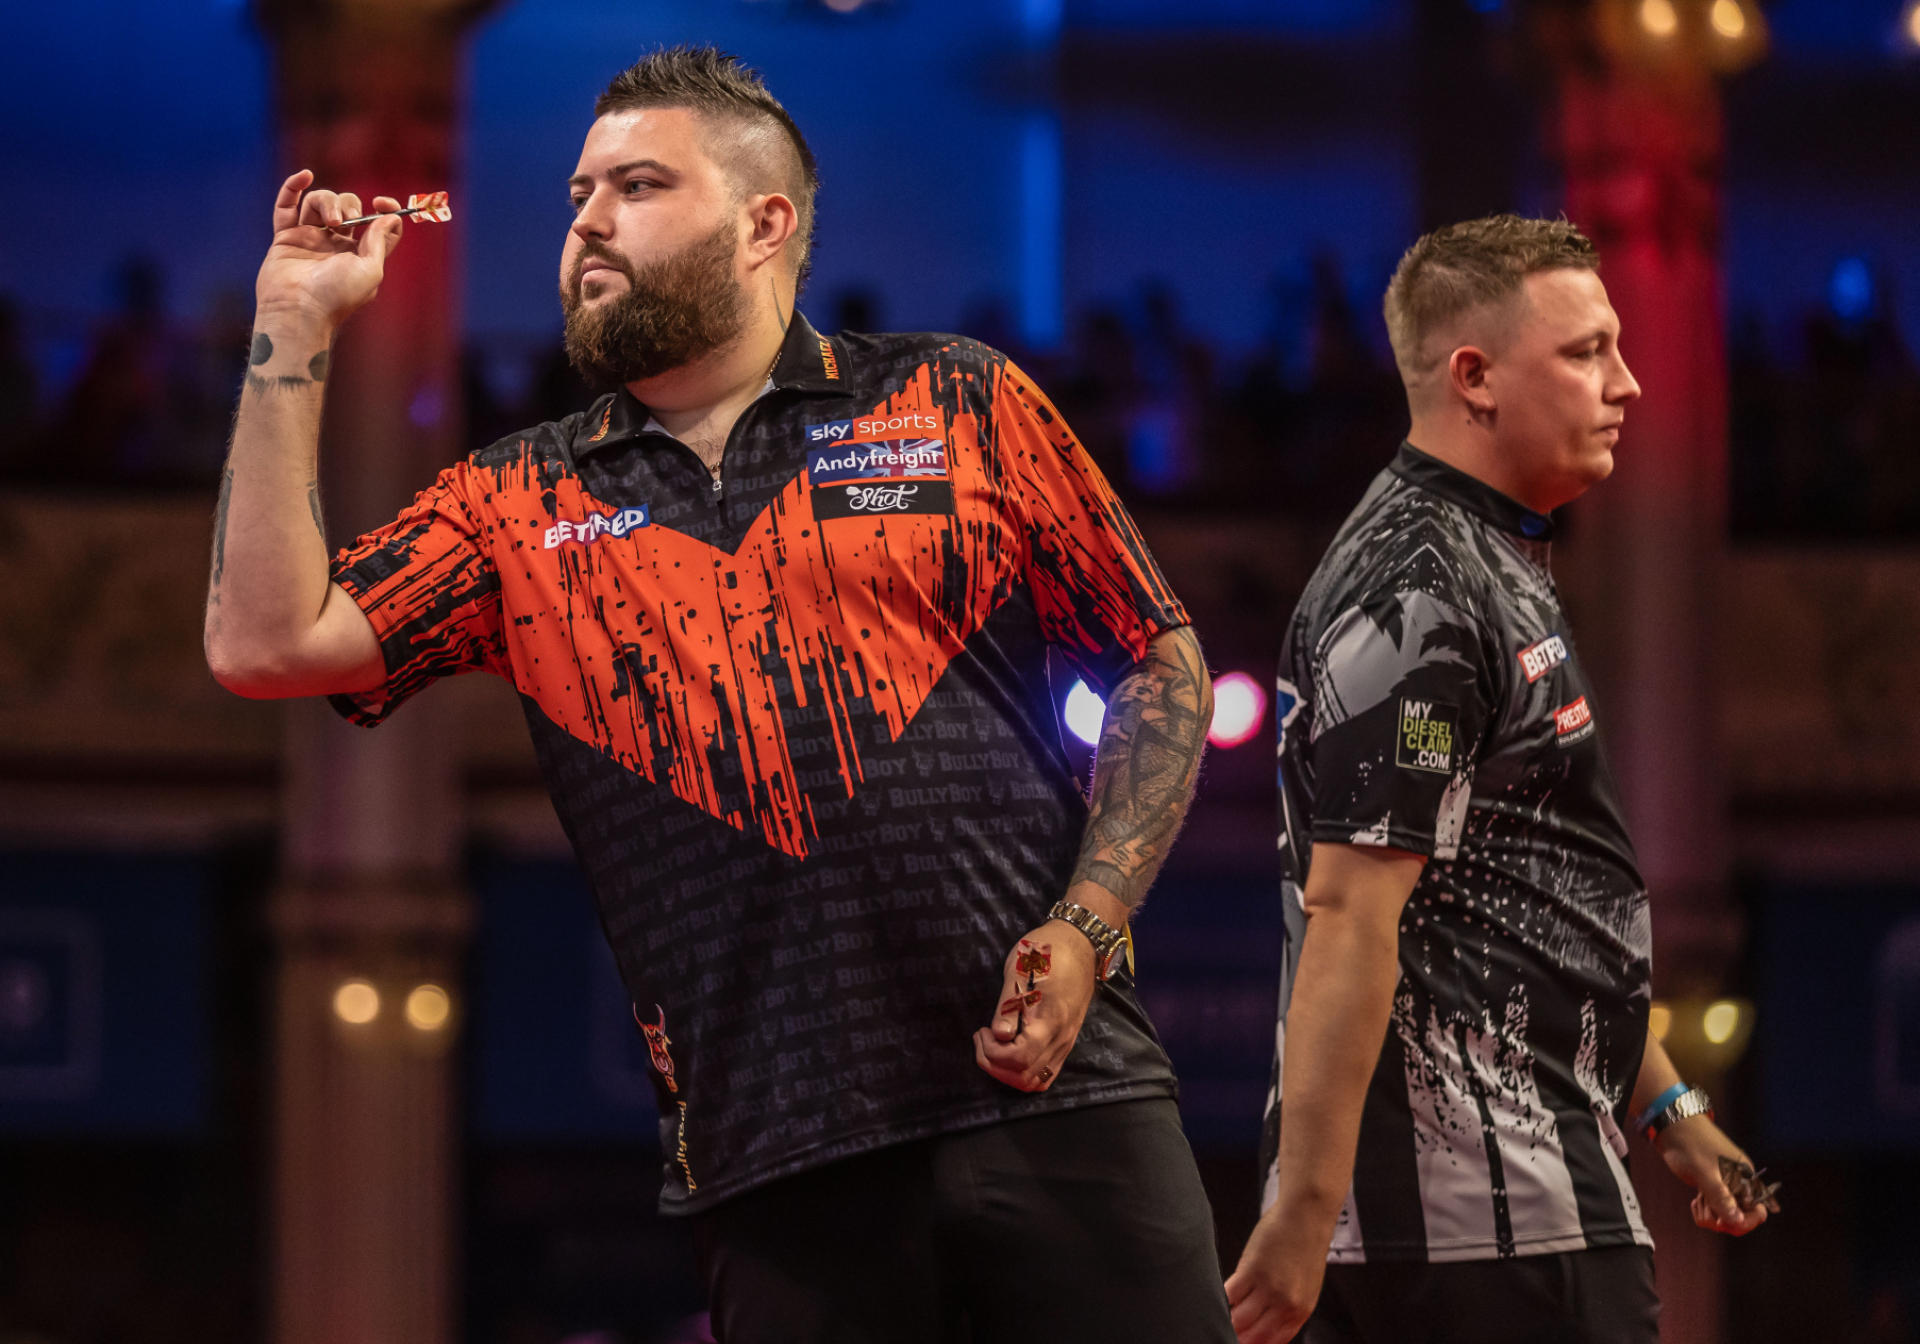 Michael Smith & Chris Dobey (Taylor Lanning/PDC)